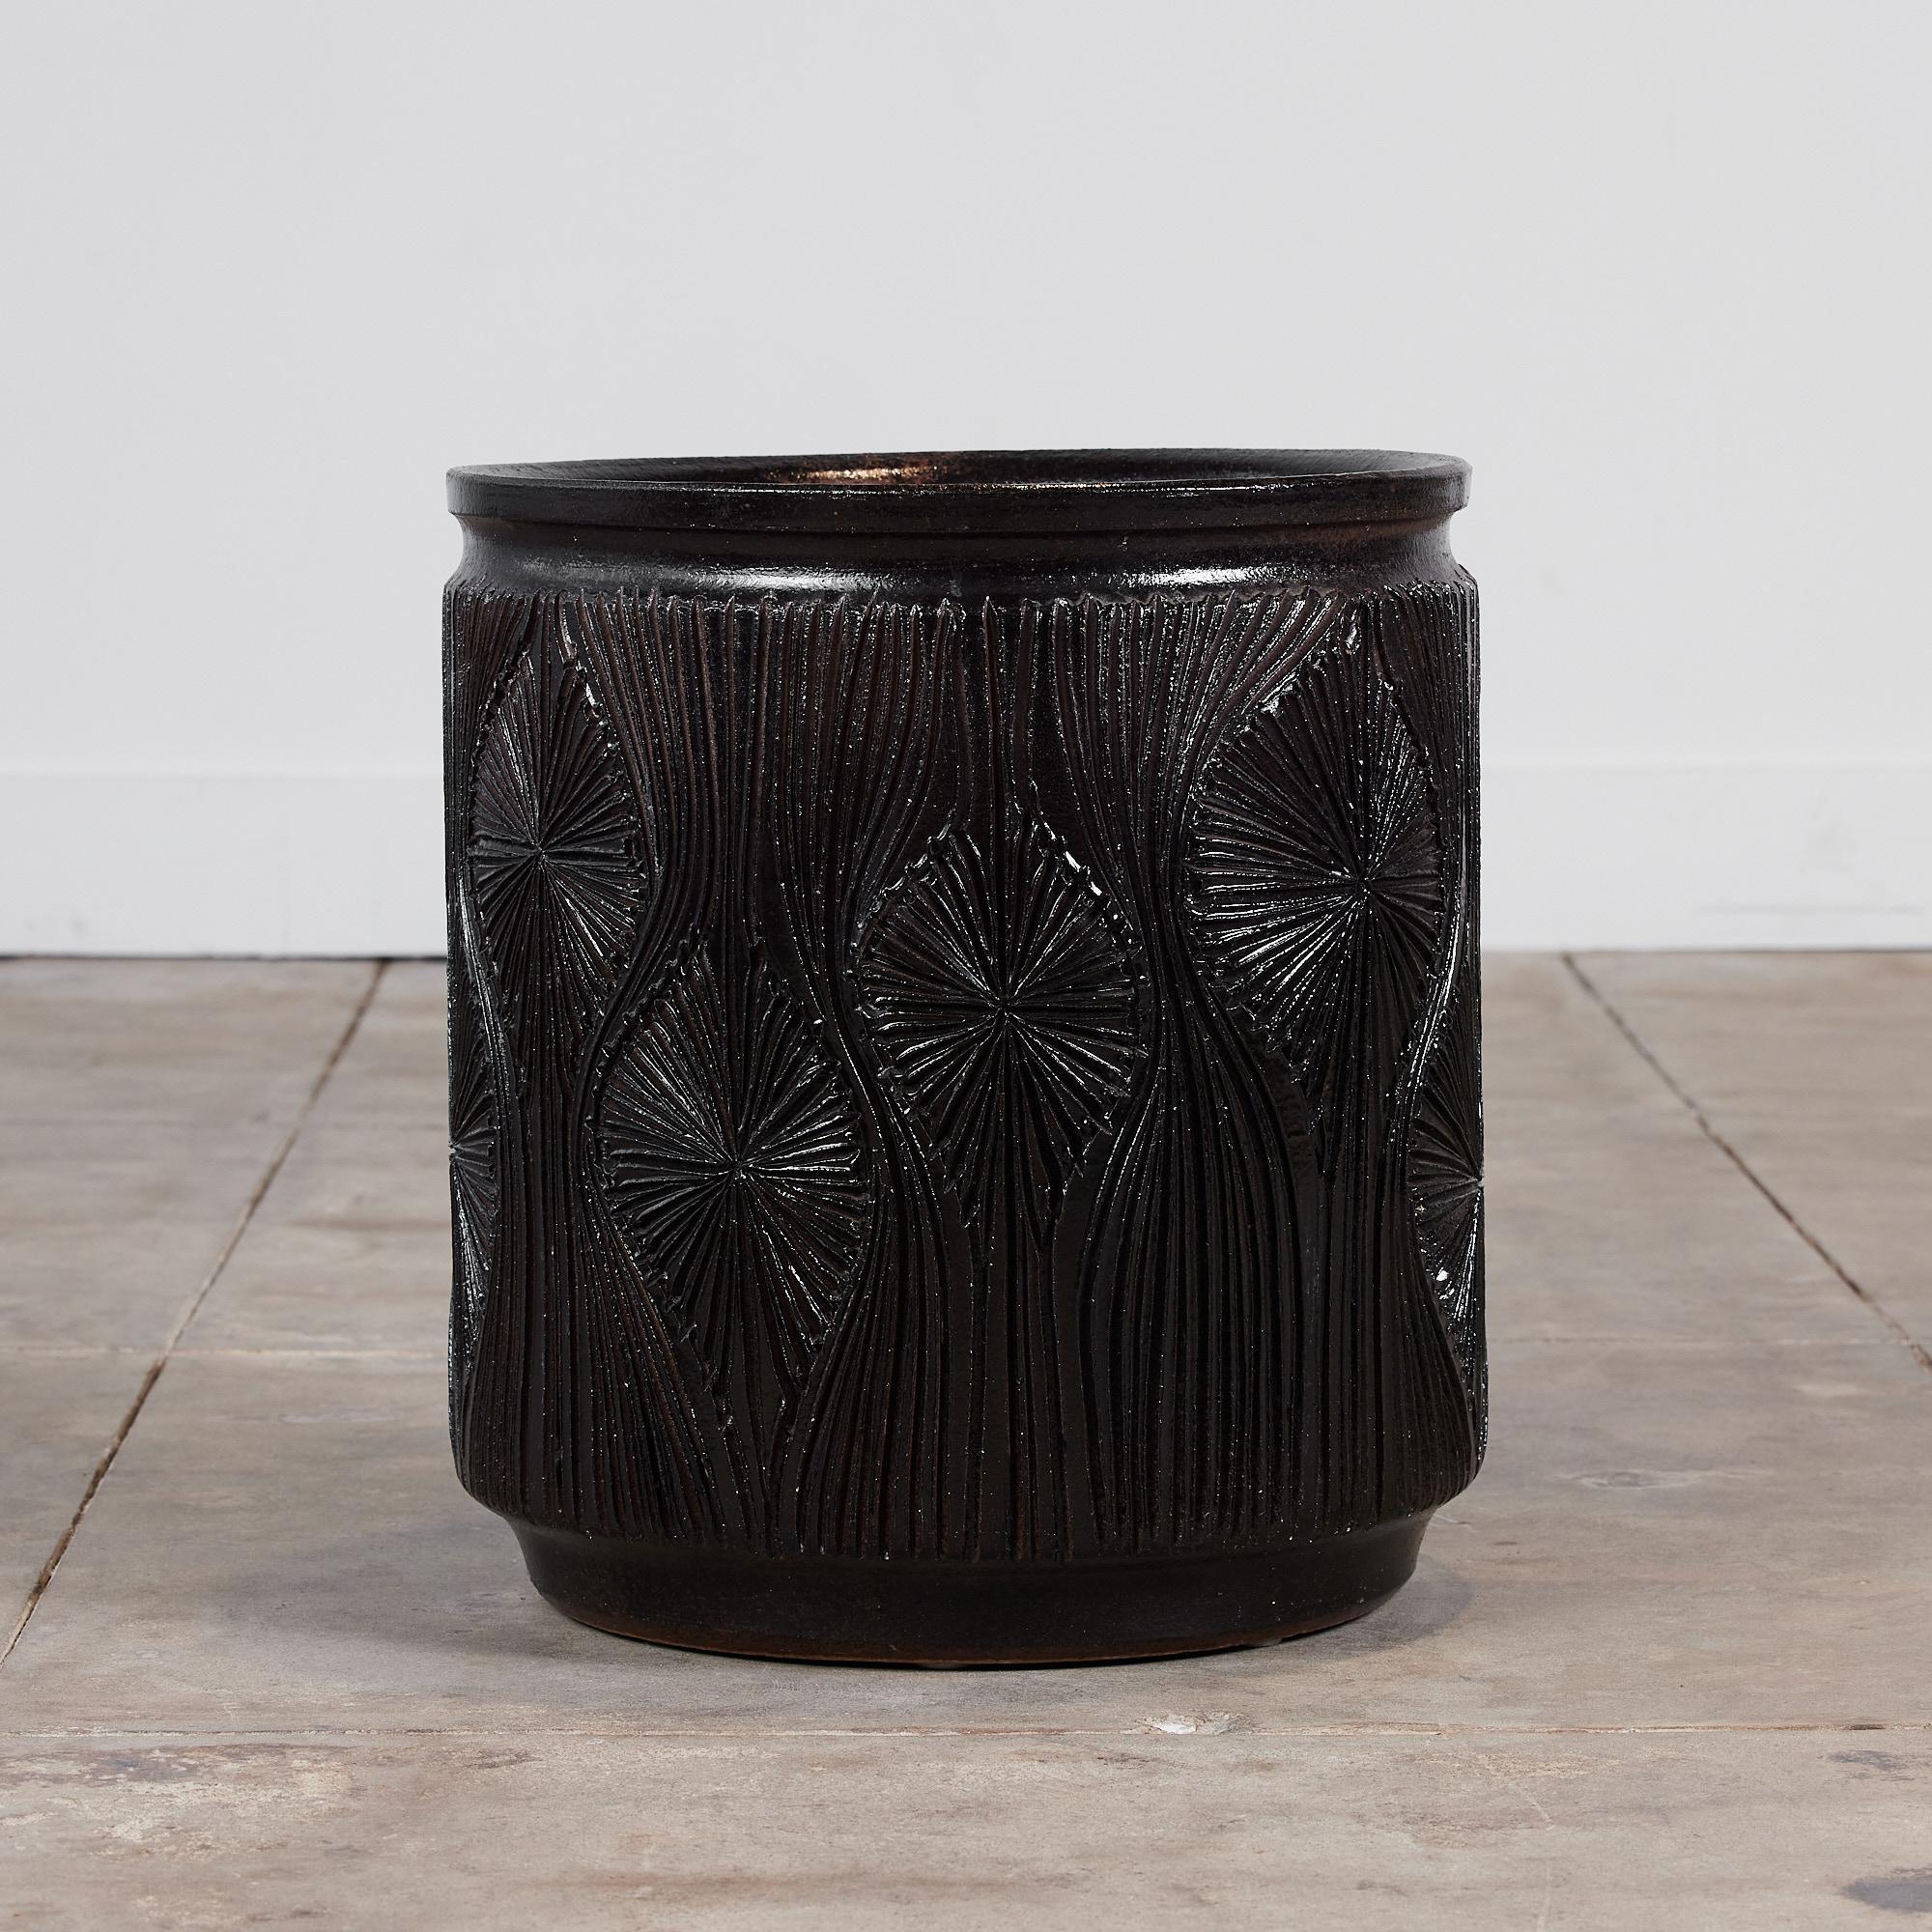 A cylindrical stoneware planter from Robert Maxwell and David Cressey's 1970s collaboration Earthgender. The planter has a rounded lip and an incised all-over teardrop sunburst pattern. The interior and exterior of the planter are covered in a dark